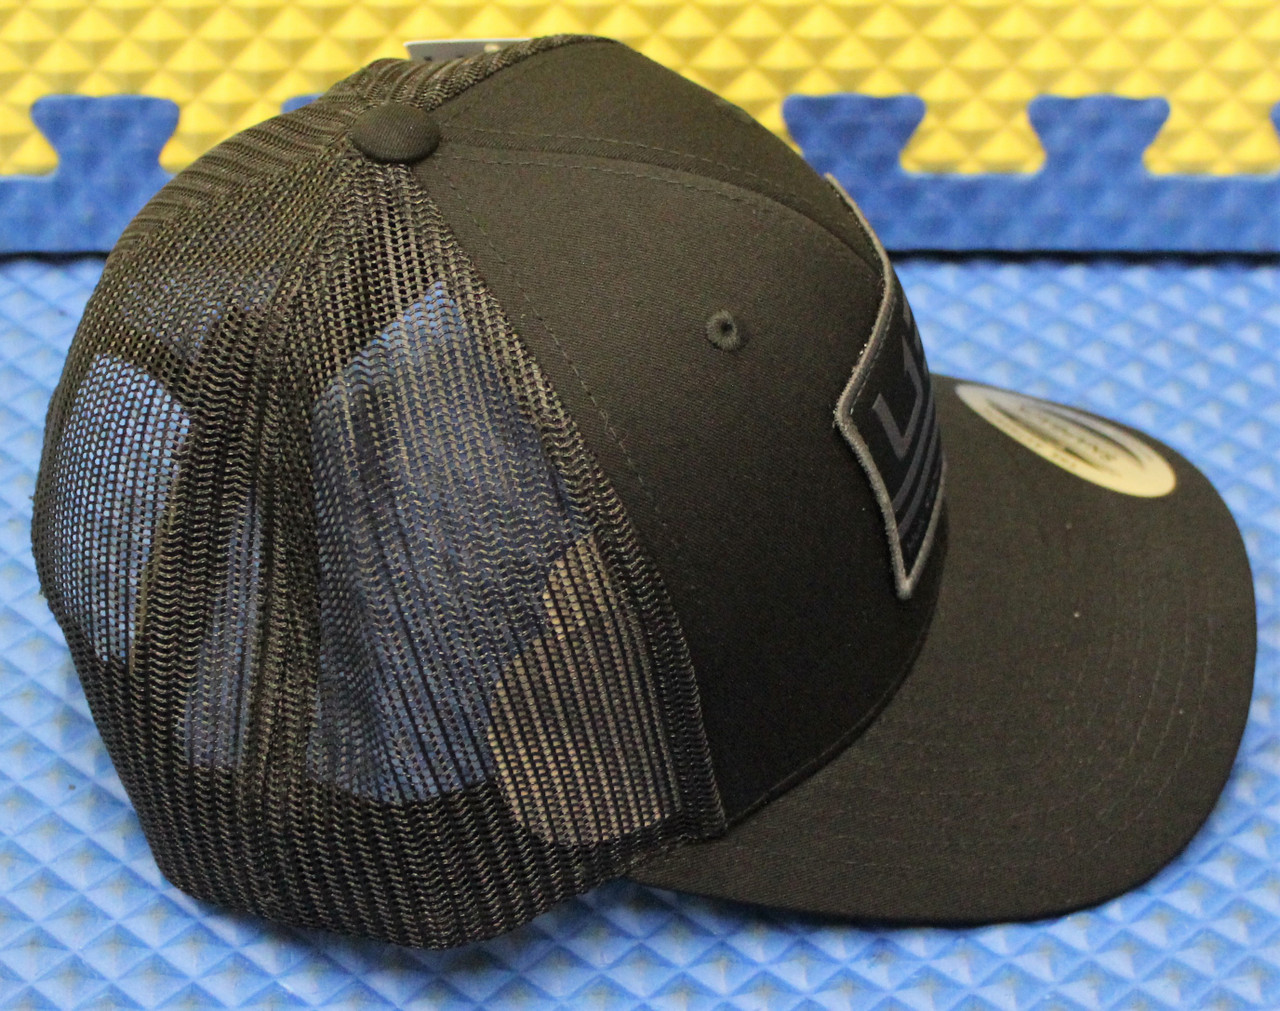 HUK Trucker Hats H3000- CHOOSE YOUR STYLE AND COLOR!